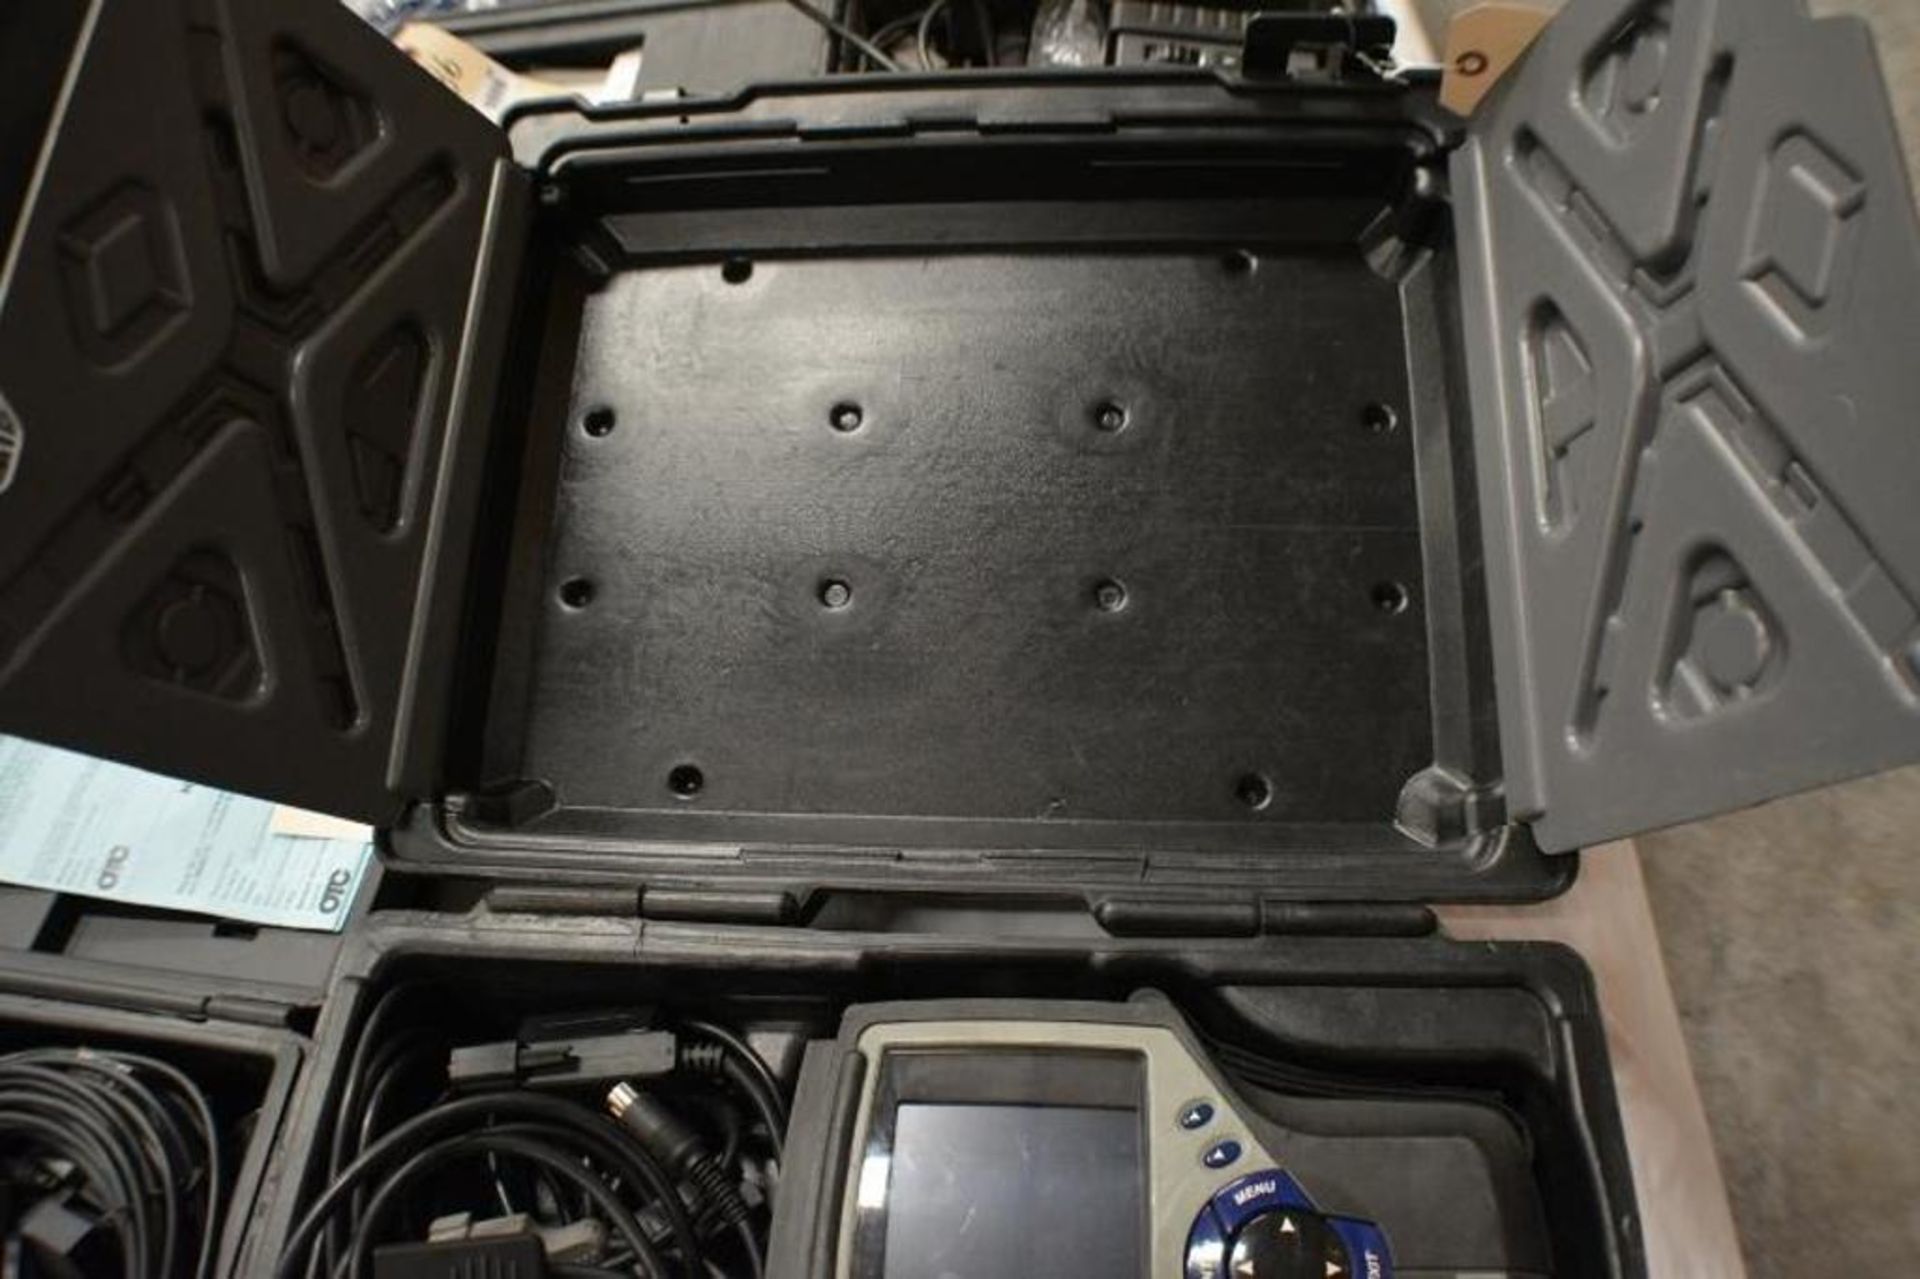 Diagnostic Scanner Genisys SPX OTC 2002 with Cables and Software Suite - Image 18 of 18